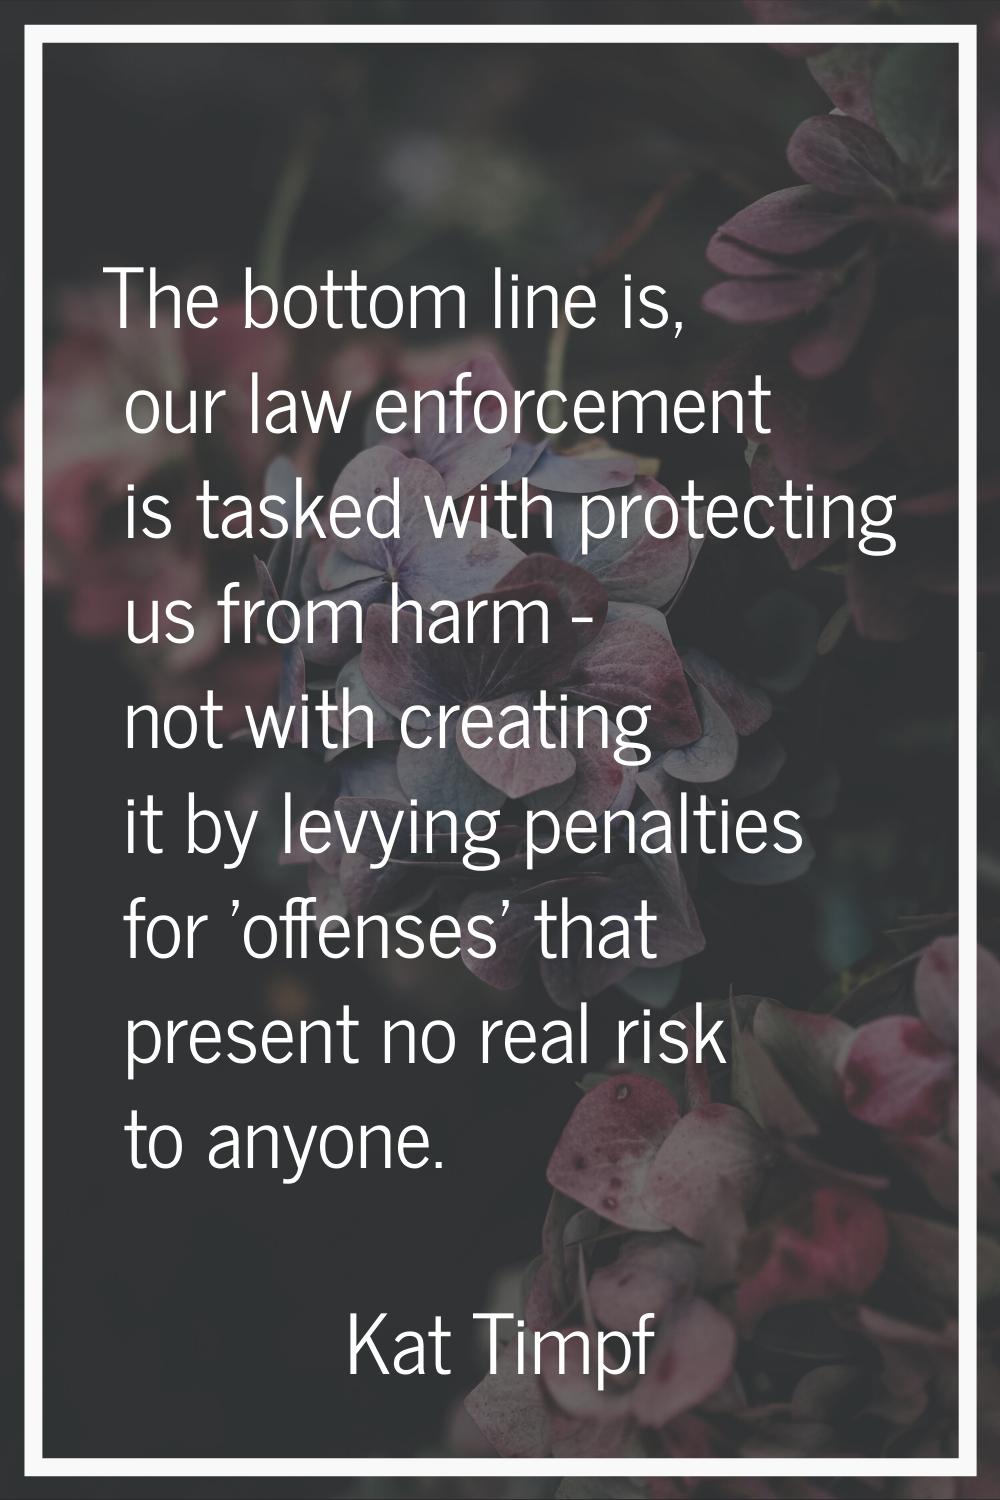 The bottom line is, our law enforcement is tasked with protecting us from harm - not with creating 